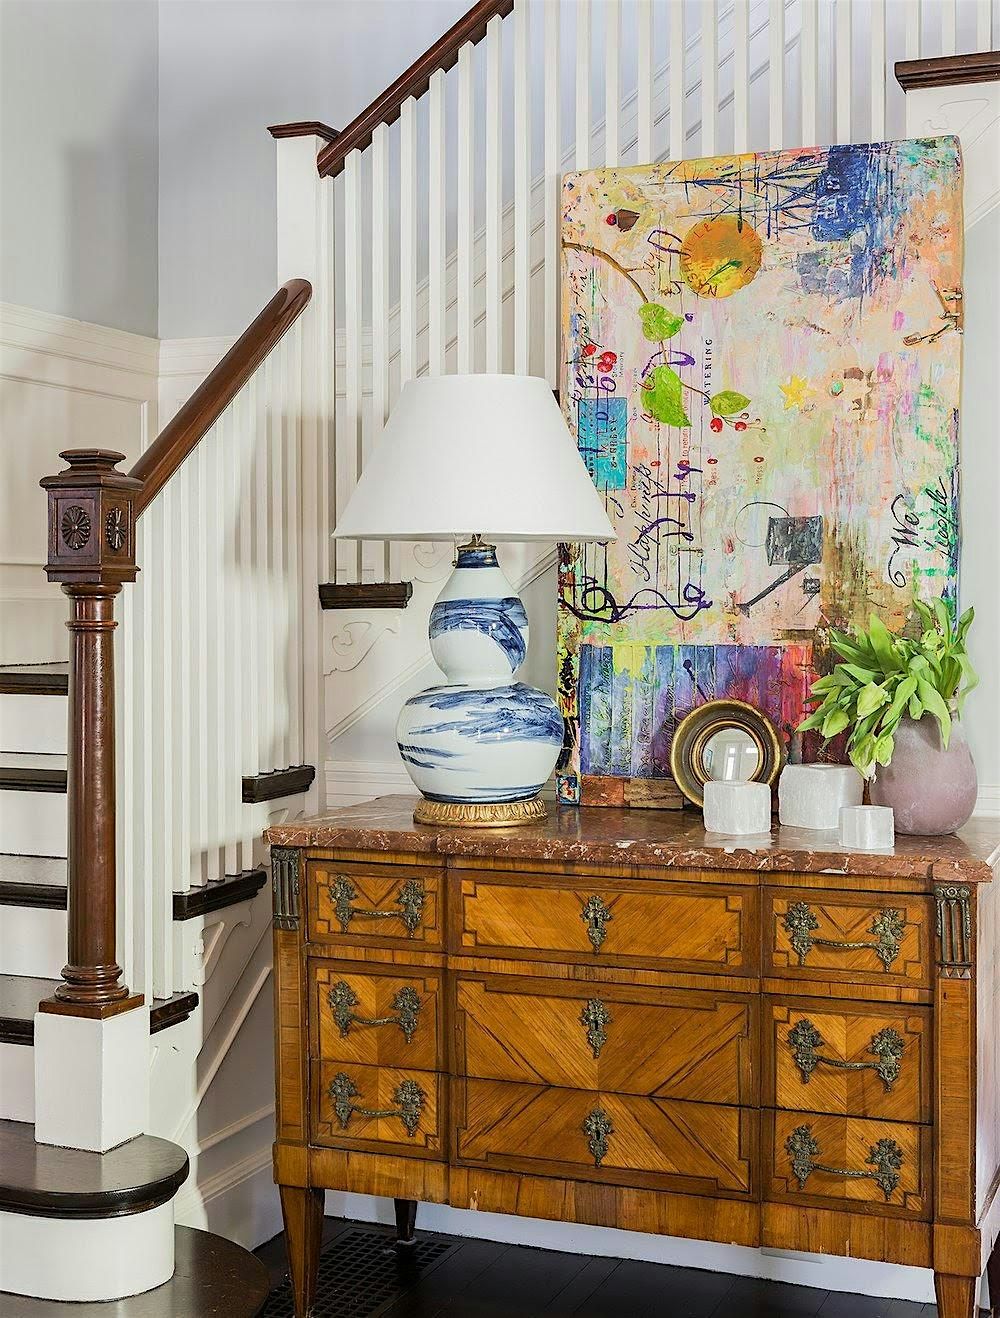 Tradition Transformed:  Antique Furniture and Contemporary Fine Art